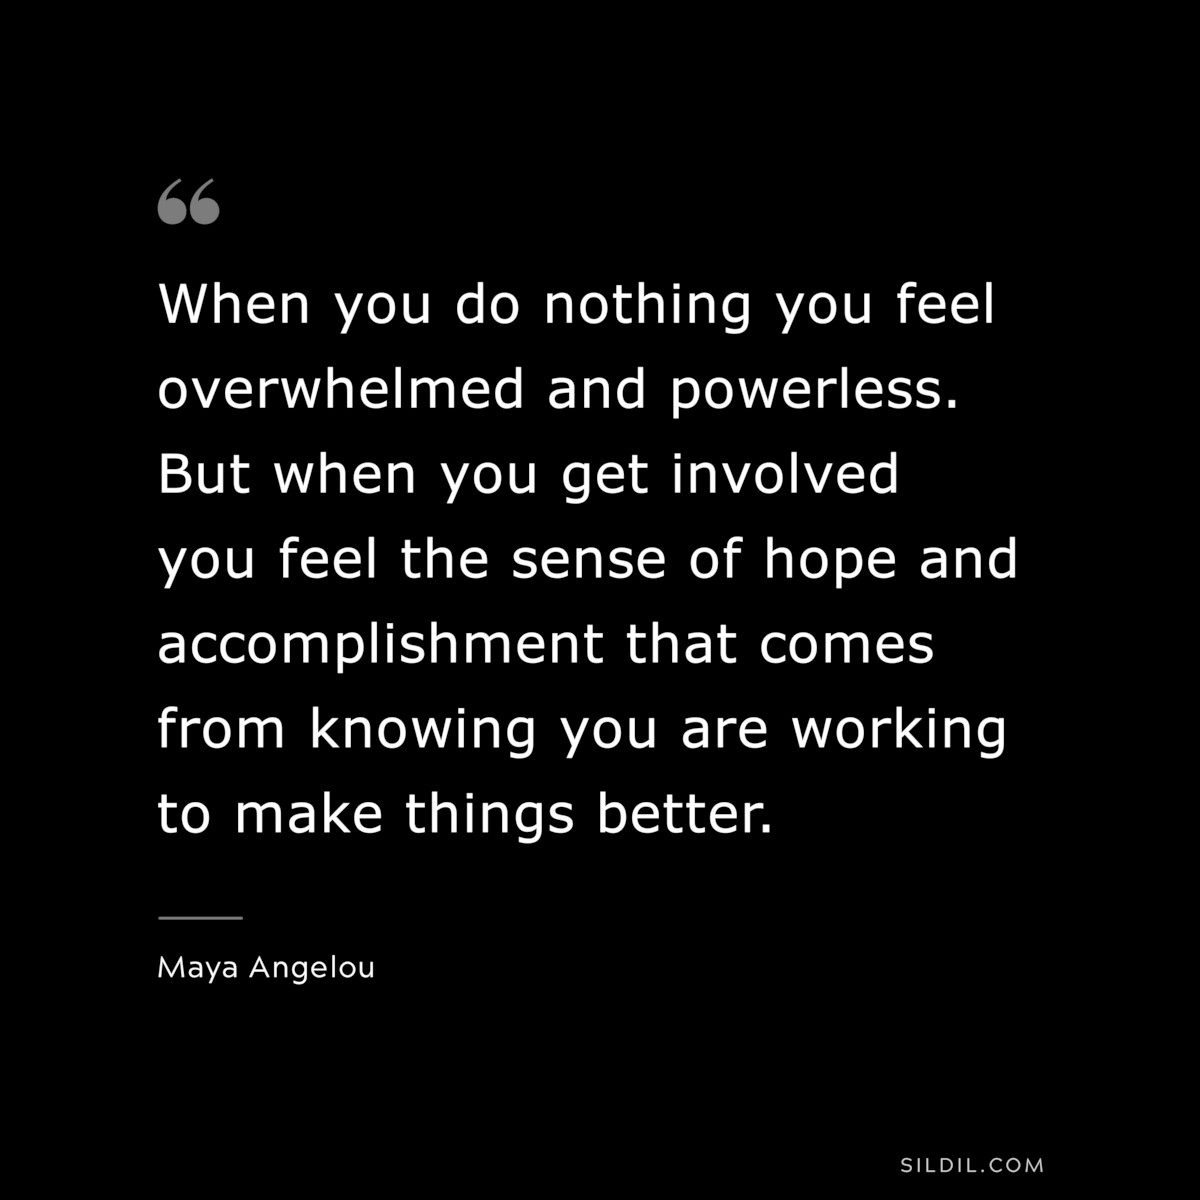 When you do nothing you feel overwhelmed and powerless. But when you get involved you feel the sense of hope and accomplishment that comes from knowing you are working to make things better. ― Maya Angelou